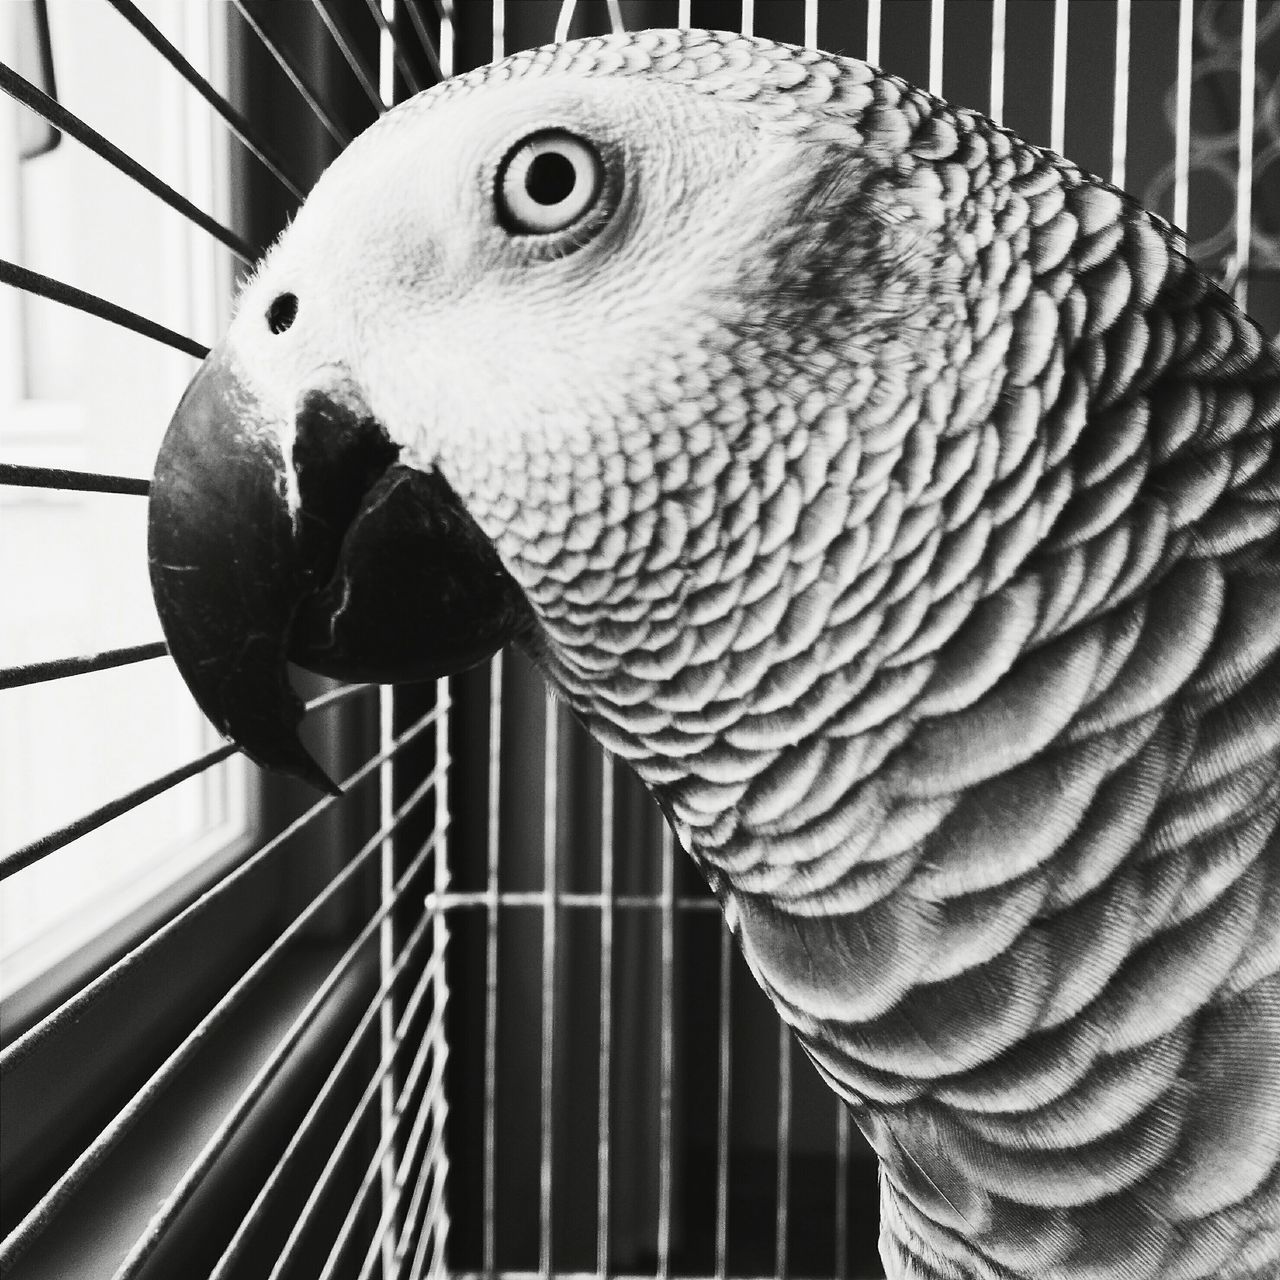 animal themes, one animal, bird, animals in the wild, wildlife, cage, close-up, focus on foreground, animals in captivity, portrait, beak, animal head, looking at camera, owl, indoors, zoo, perching, no people, bird of prey, day